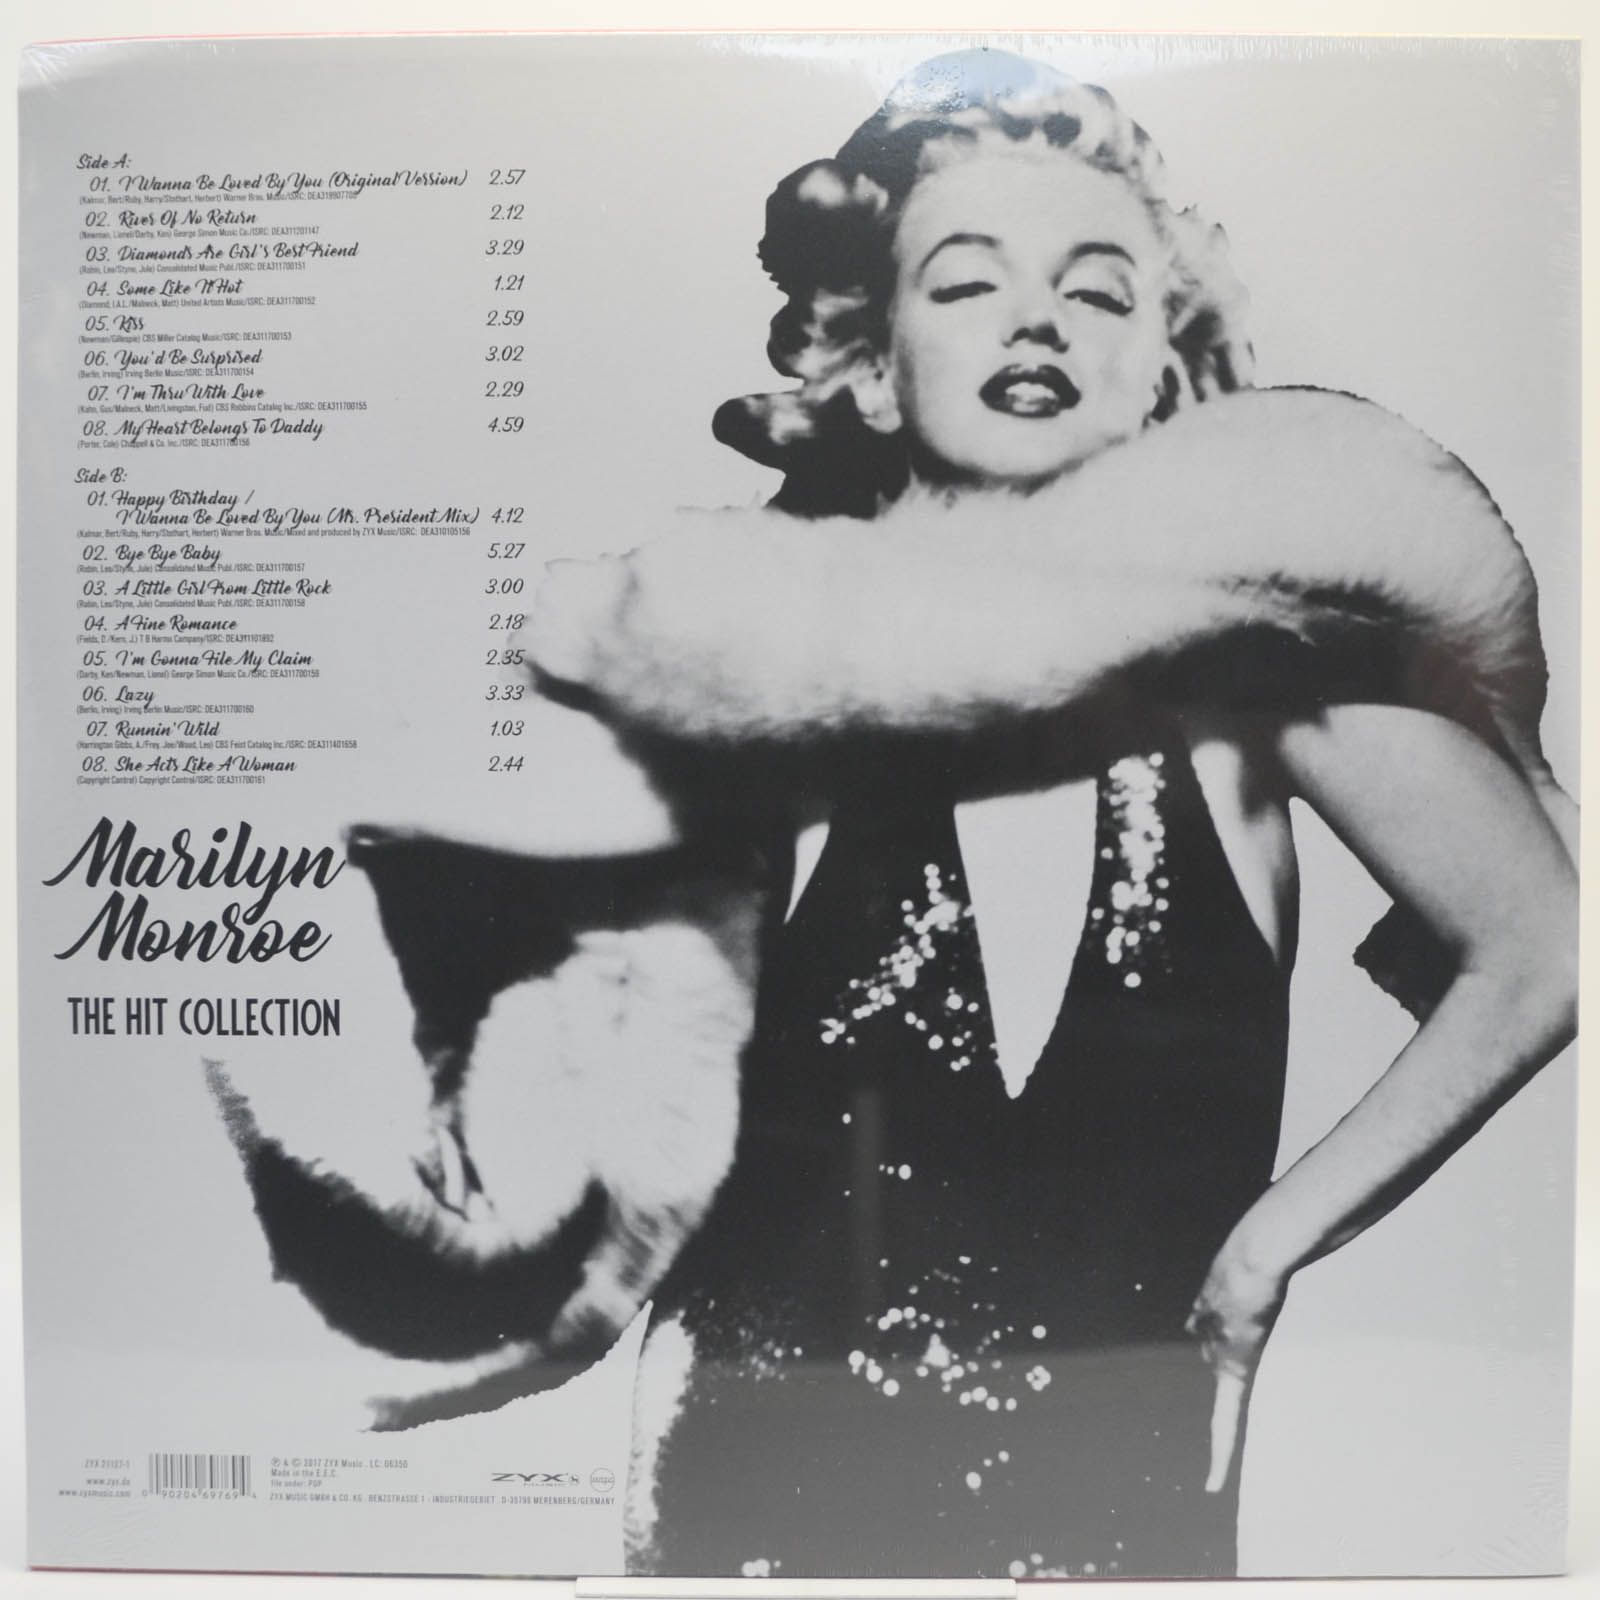 Marilyn Monroe — The Hit Collection, 2017